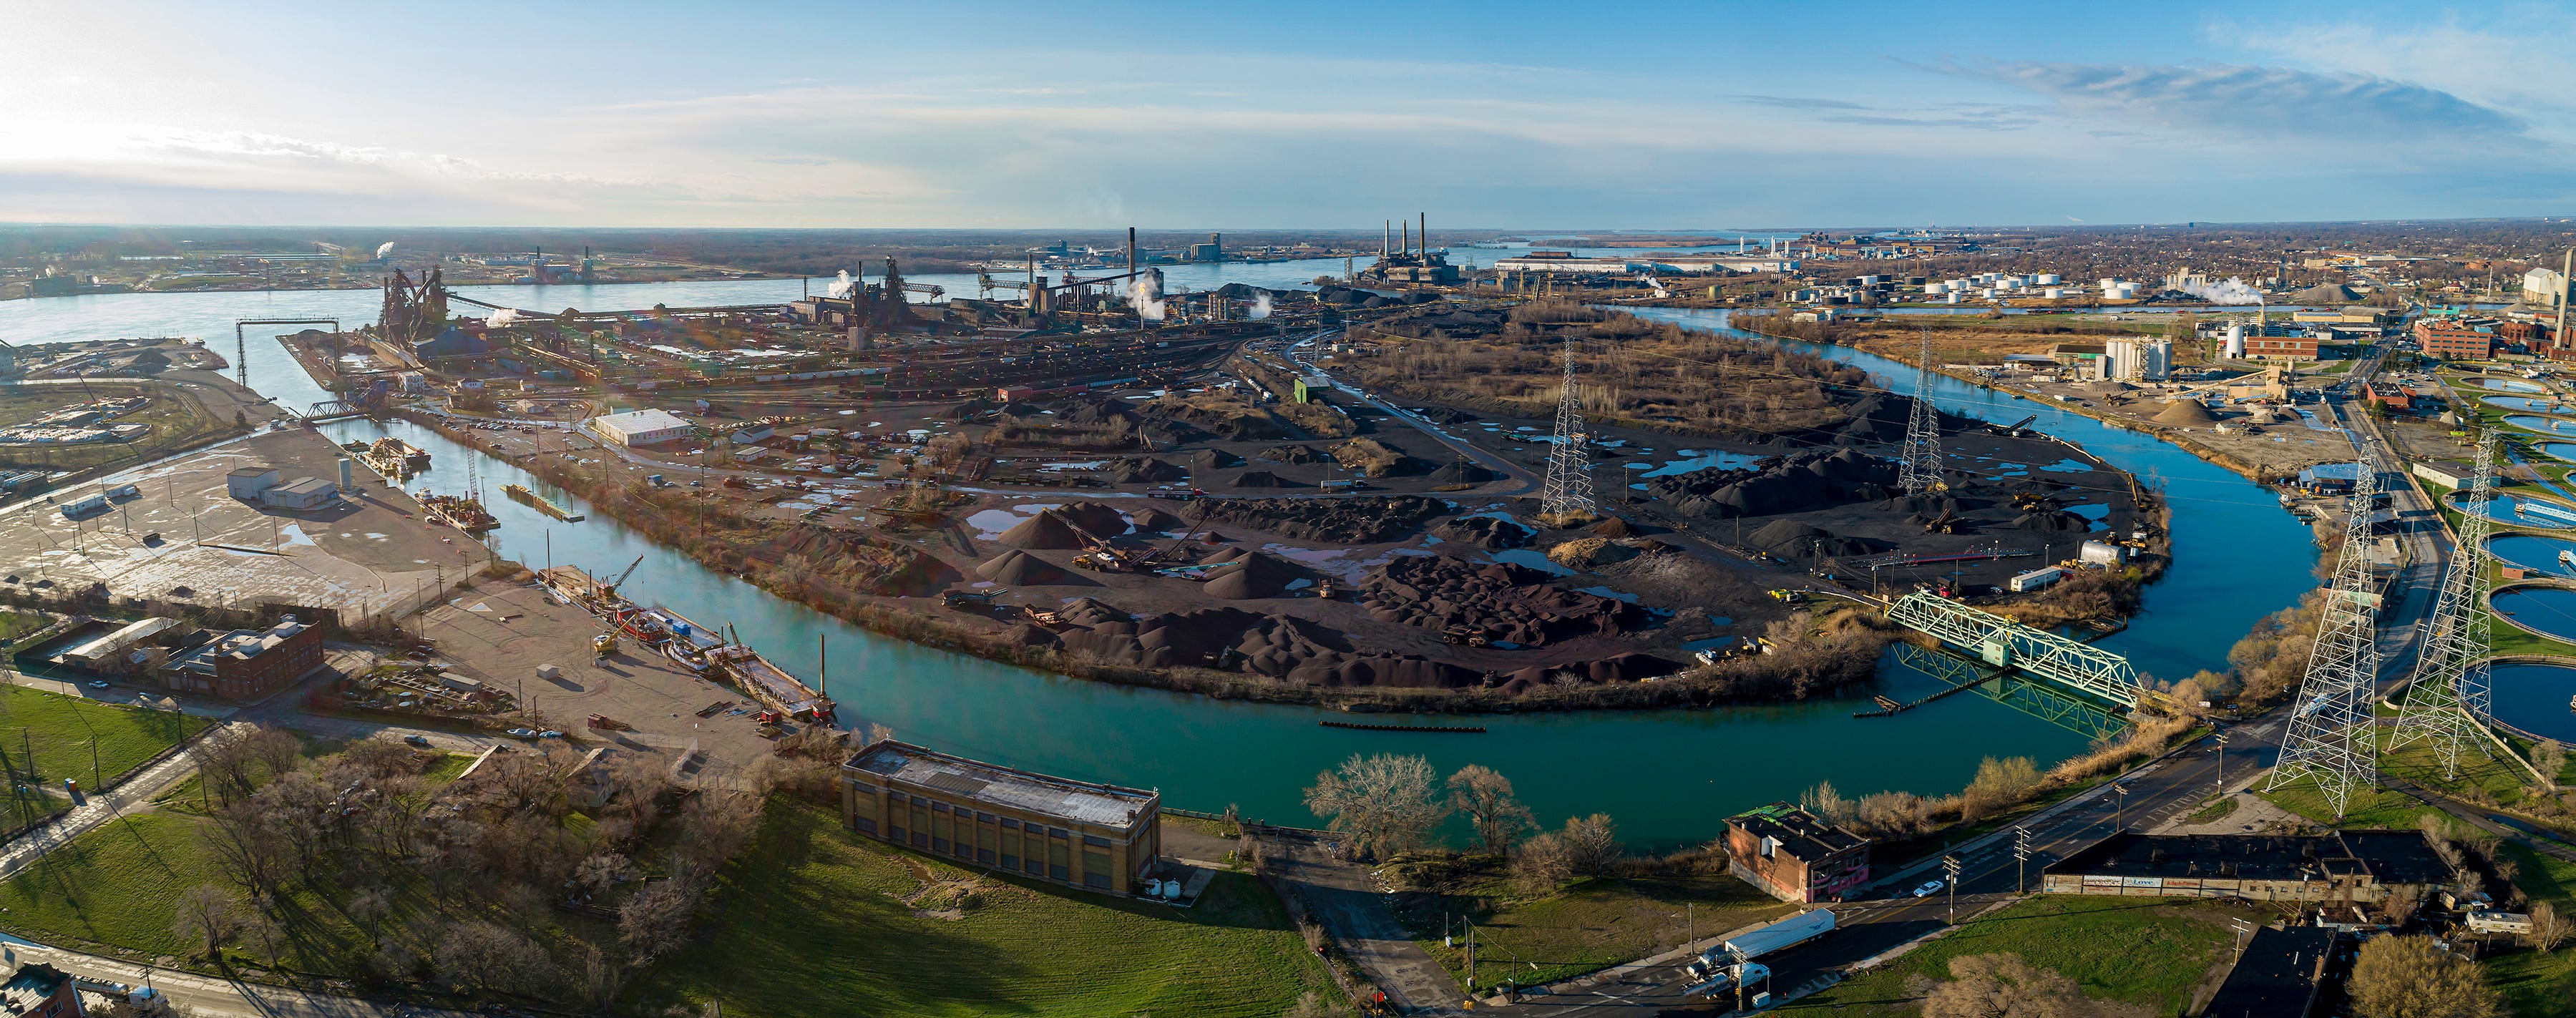 The bridge at the upper left in this recent drone photograph doubles as a railroad trestle and is the main entrance to Great Lakes Works on Zug Island. The two tall structures beyond the bridge are the A and B furnaces, idled respectively around 2000 and last summer. The similar dark tower to their right is blast furnace D, which may have produced its last iron in late March. The bridge at the lower right, known as the Gap Gate, is rarely used.